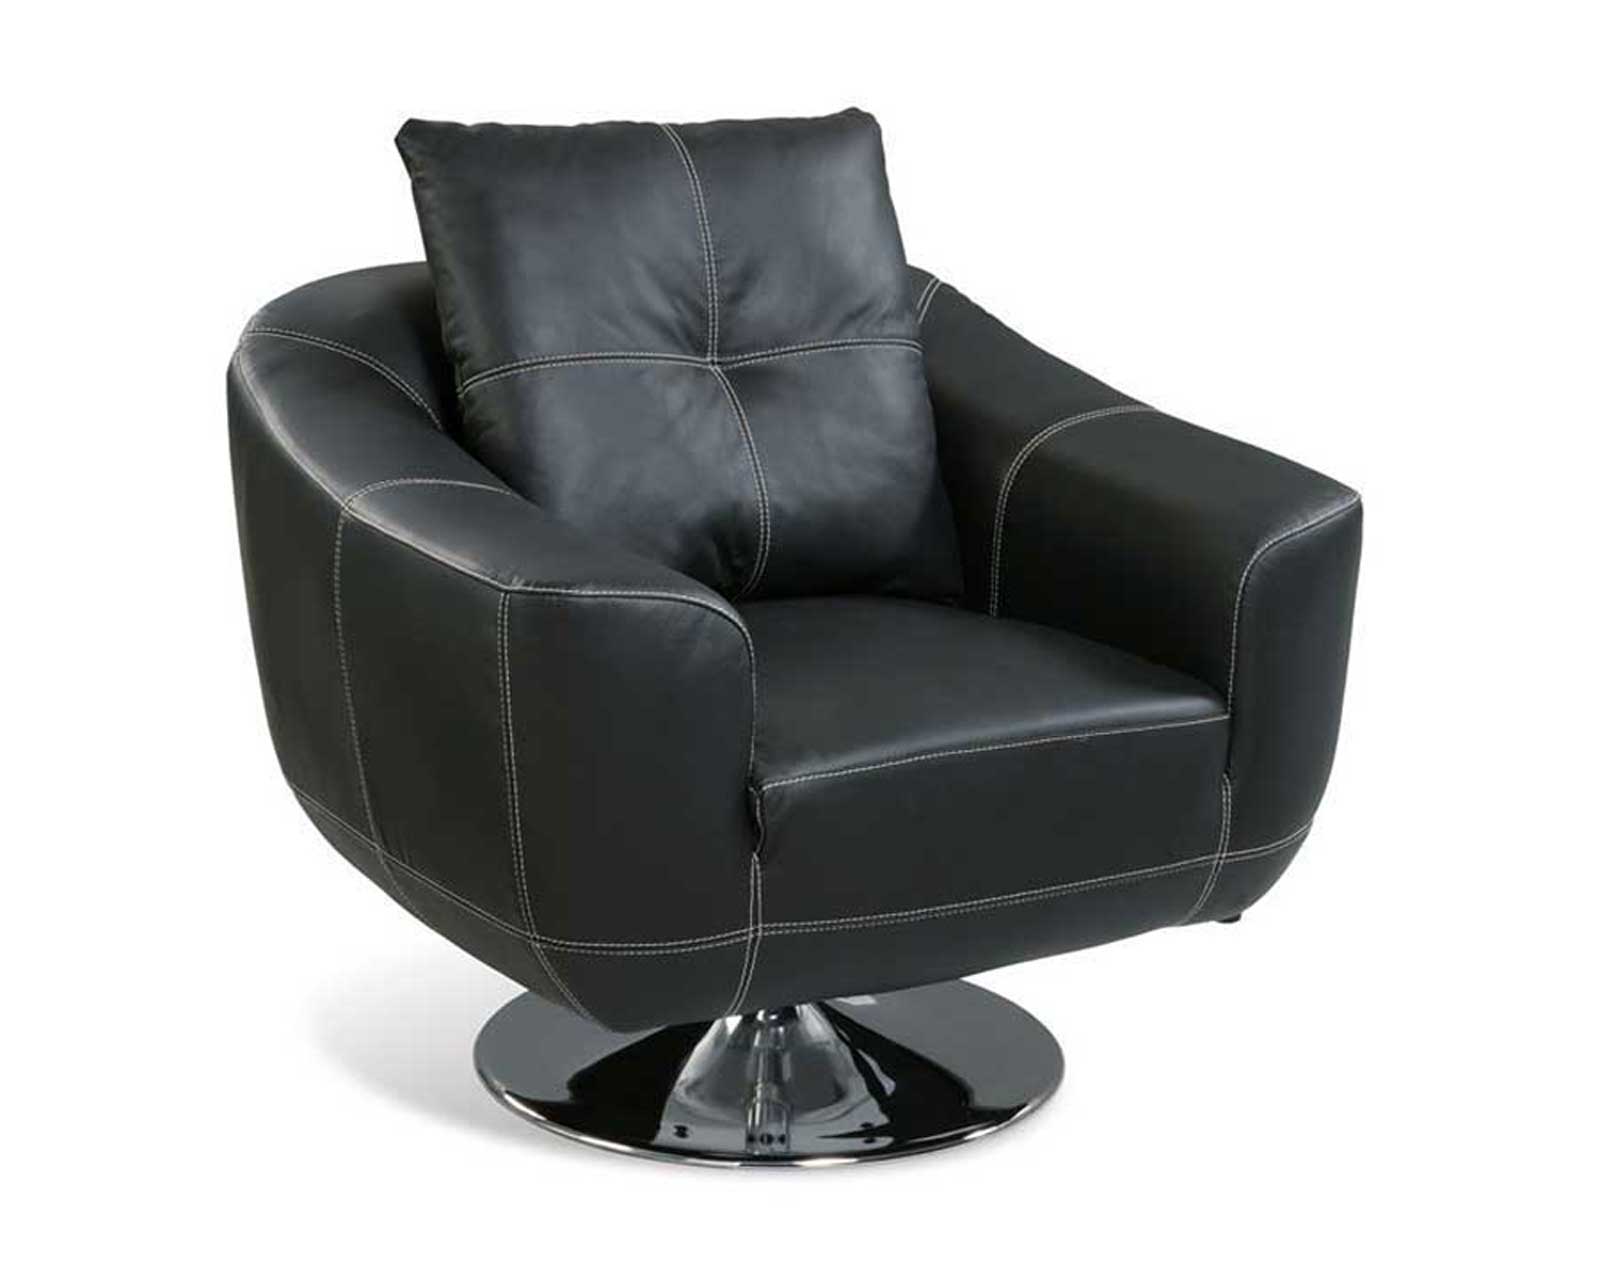 leather swivel chairs for living room on Leather Swivel Chairs For Living Room   Office Furniture